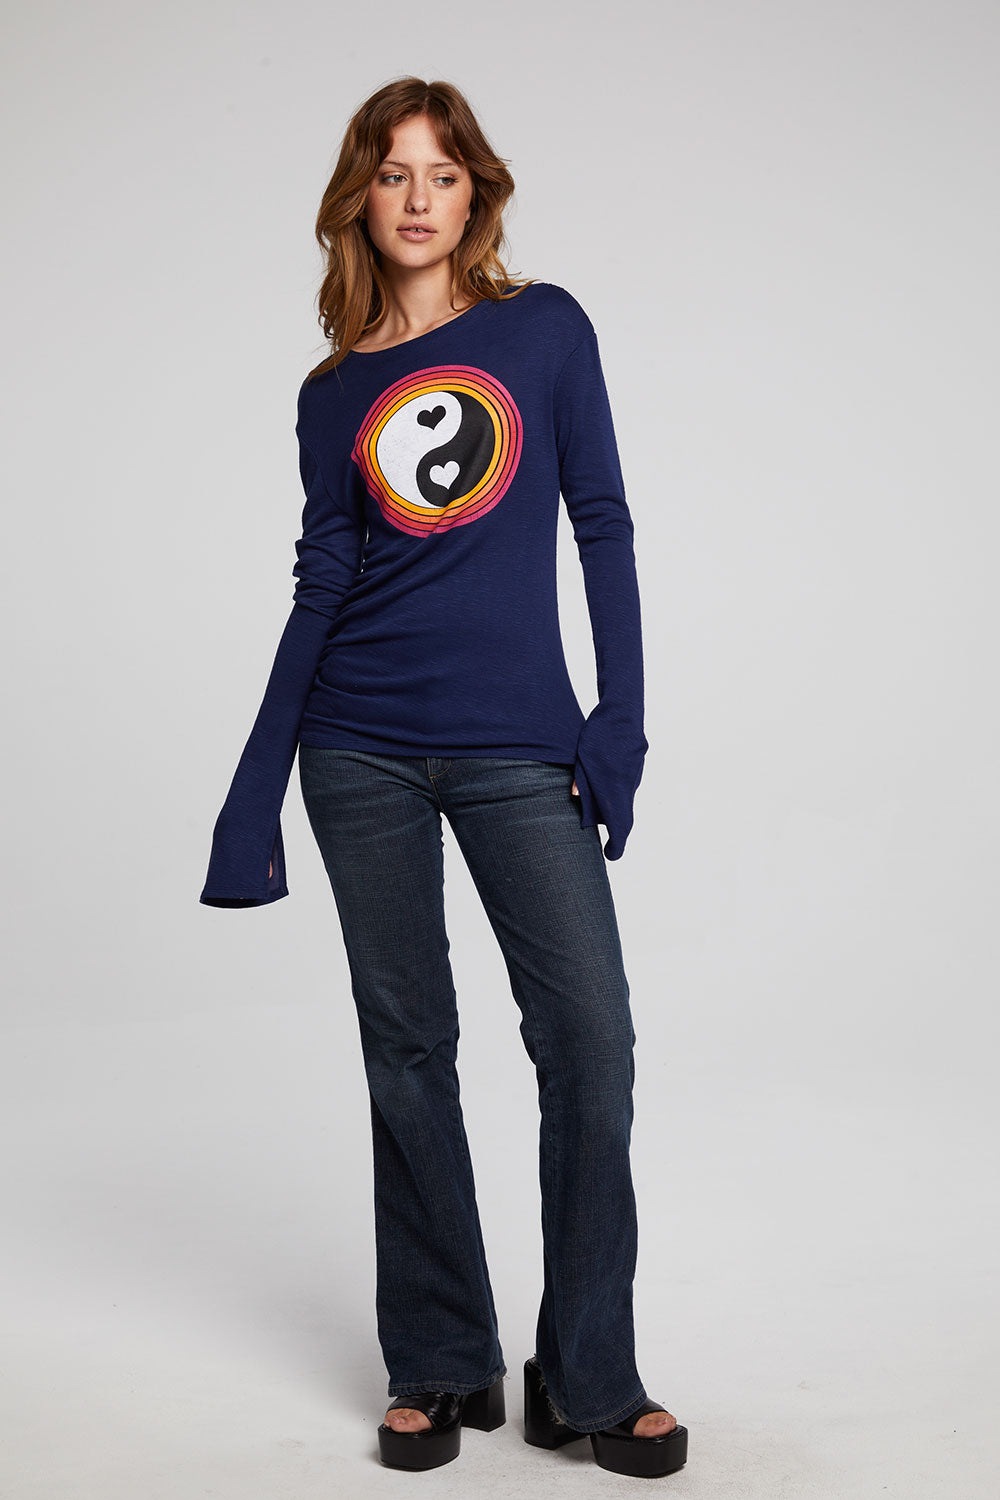 Love Yin Yang Pullover WOMENS chaserbrand